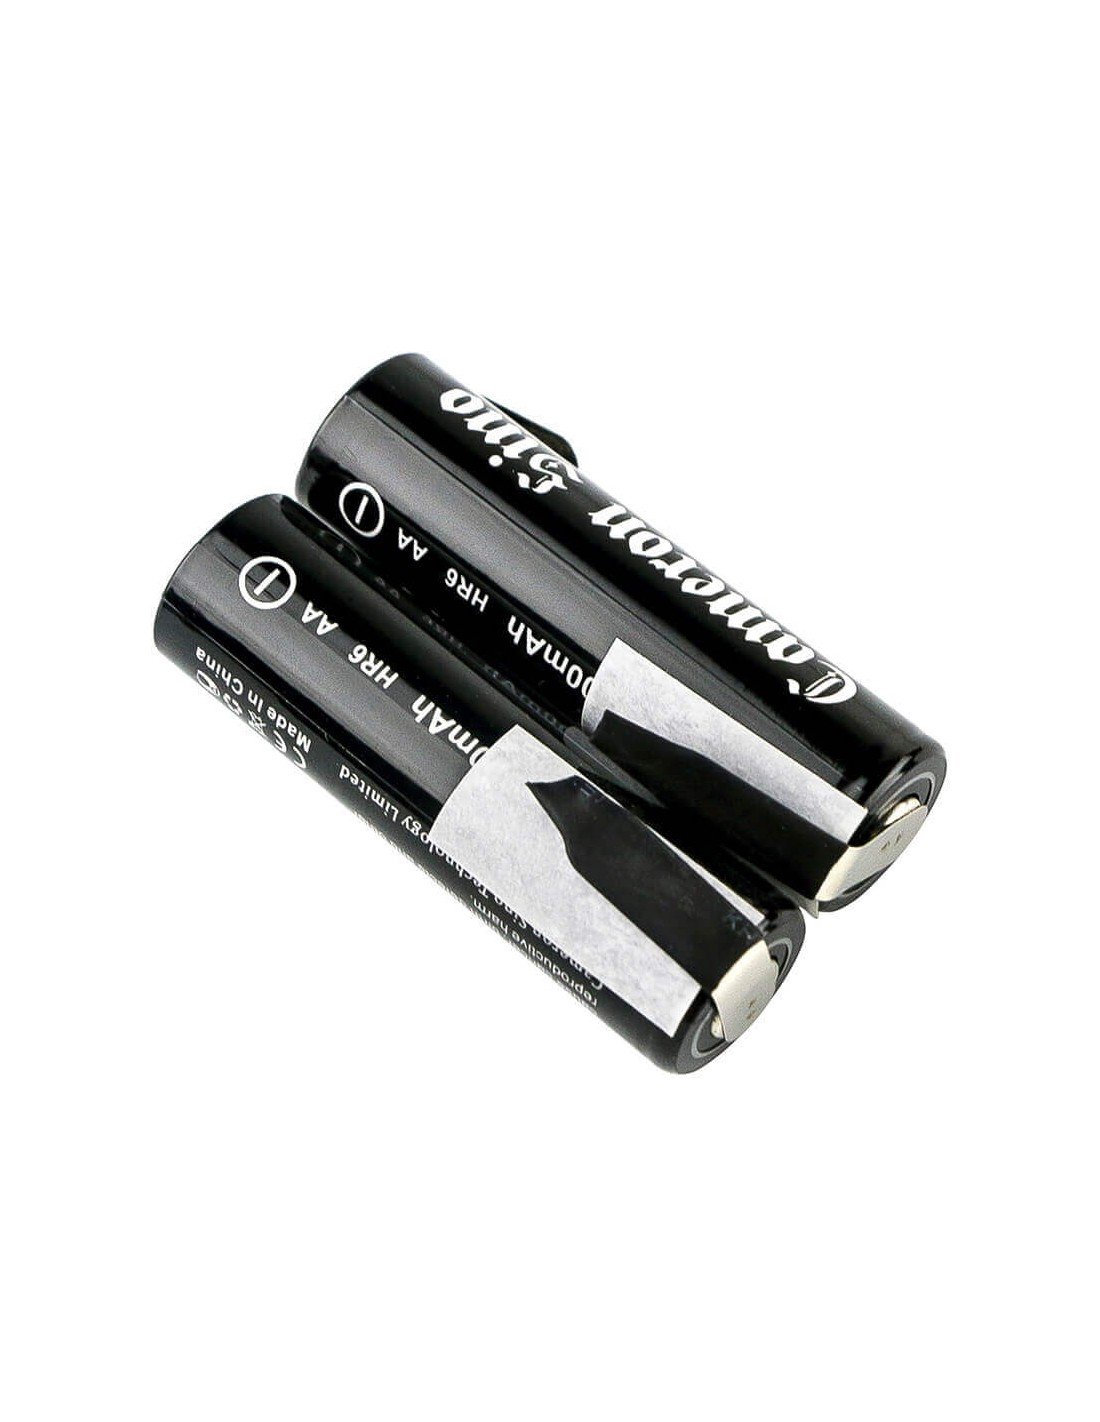 Two Batteris for Aa Aa, Am3, E91 with solder tabs - reversed at one end 1.2V, 2000mAh - 2.40Wh